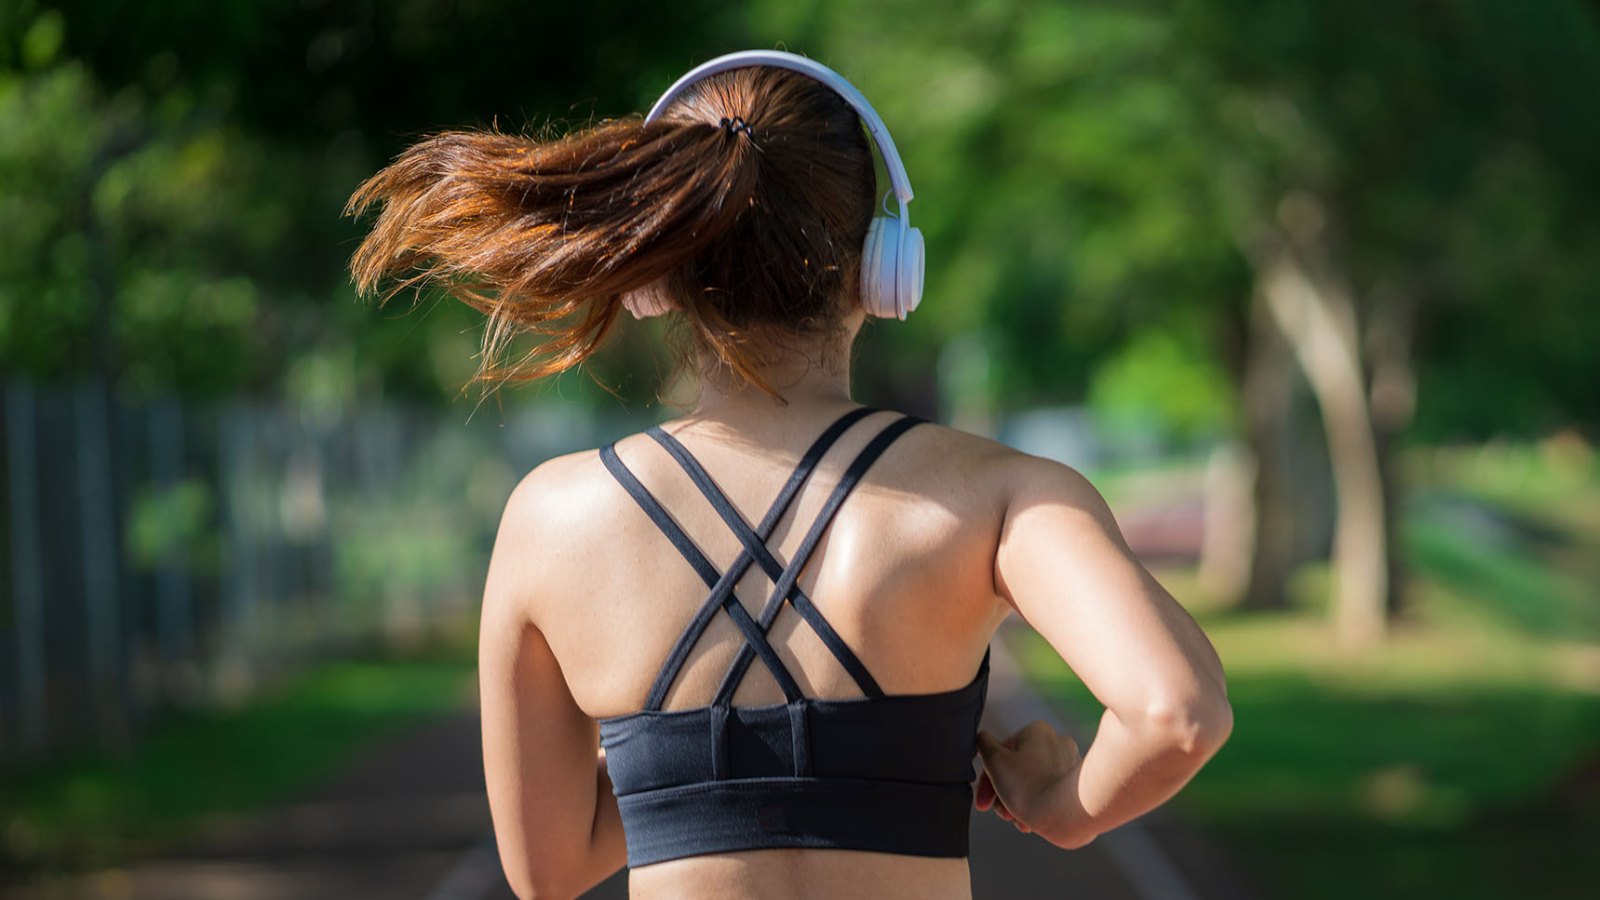 Young fitness sports women runner running in the park. Happy athletic woman listening music on earphones while running in nature in the morning. Healthy fitness woman jogging outdoors.